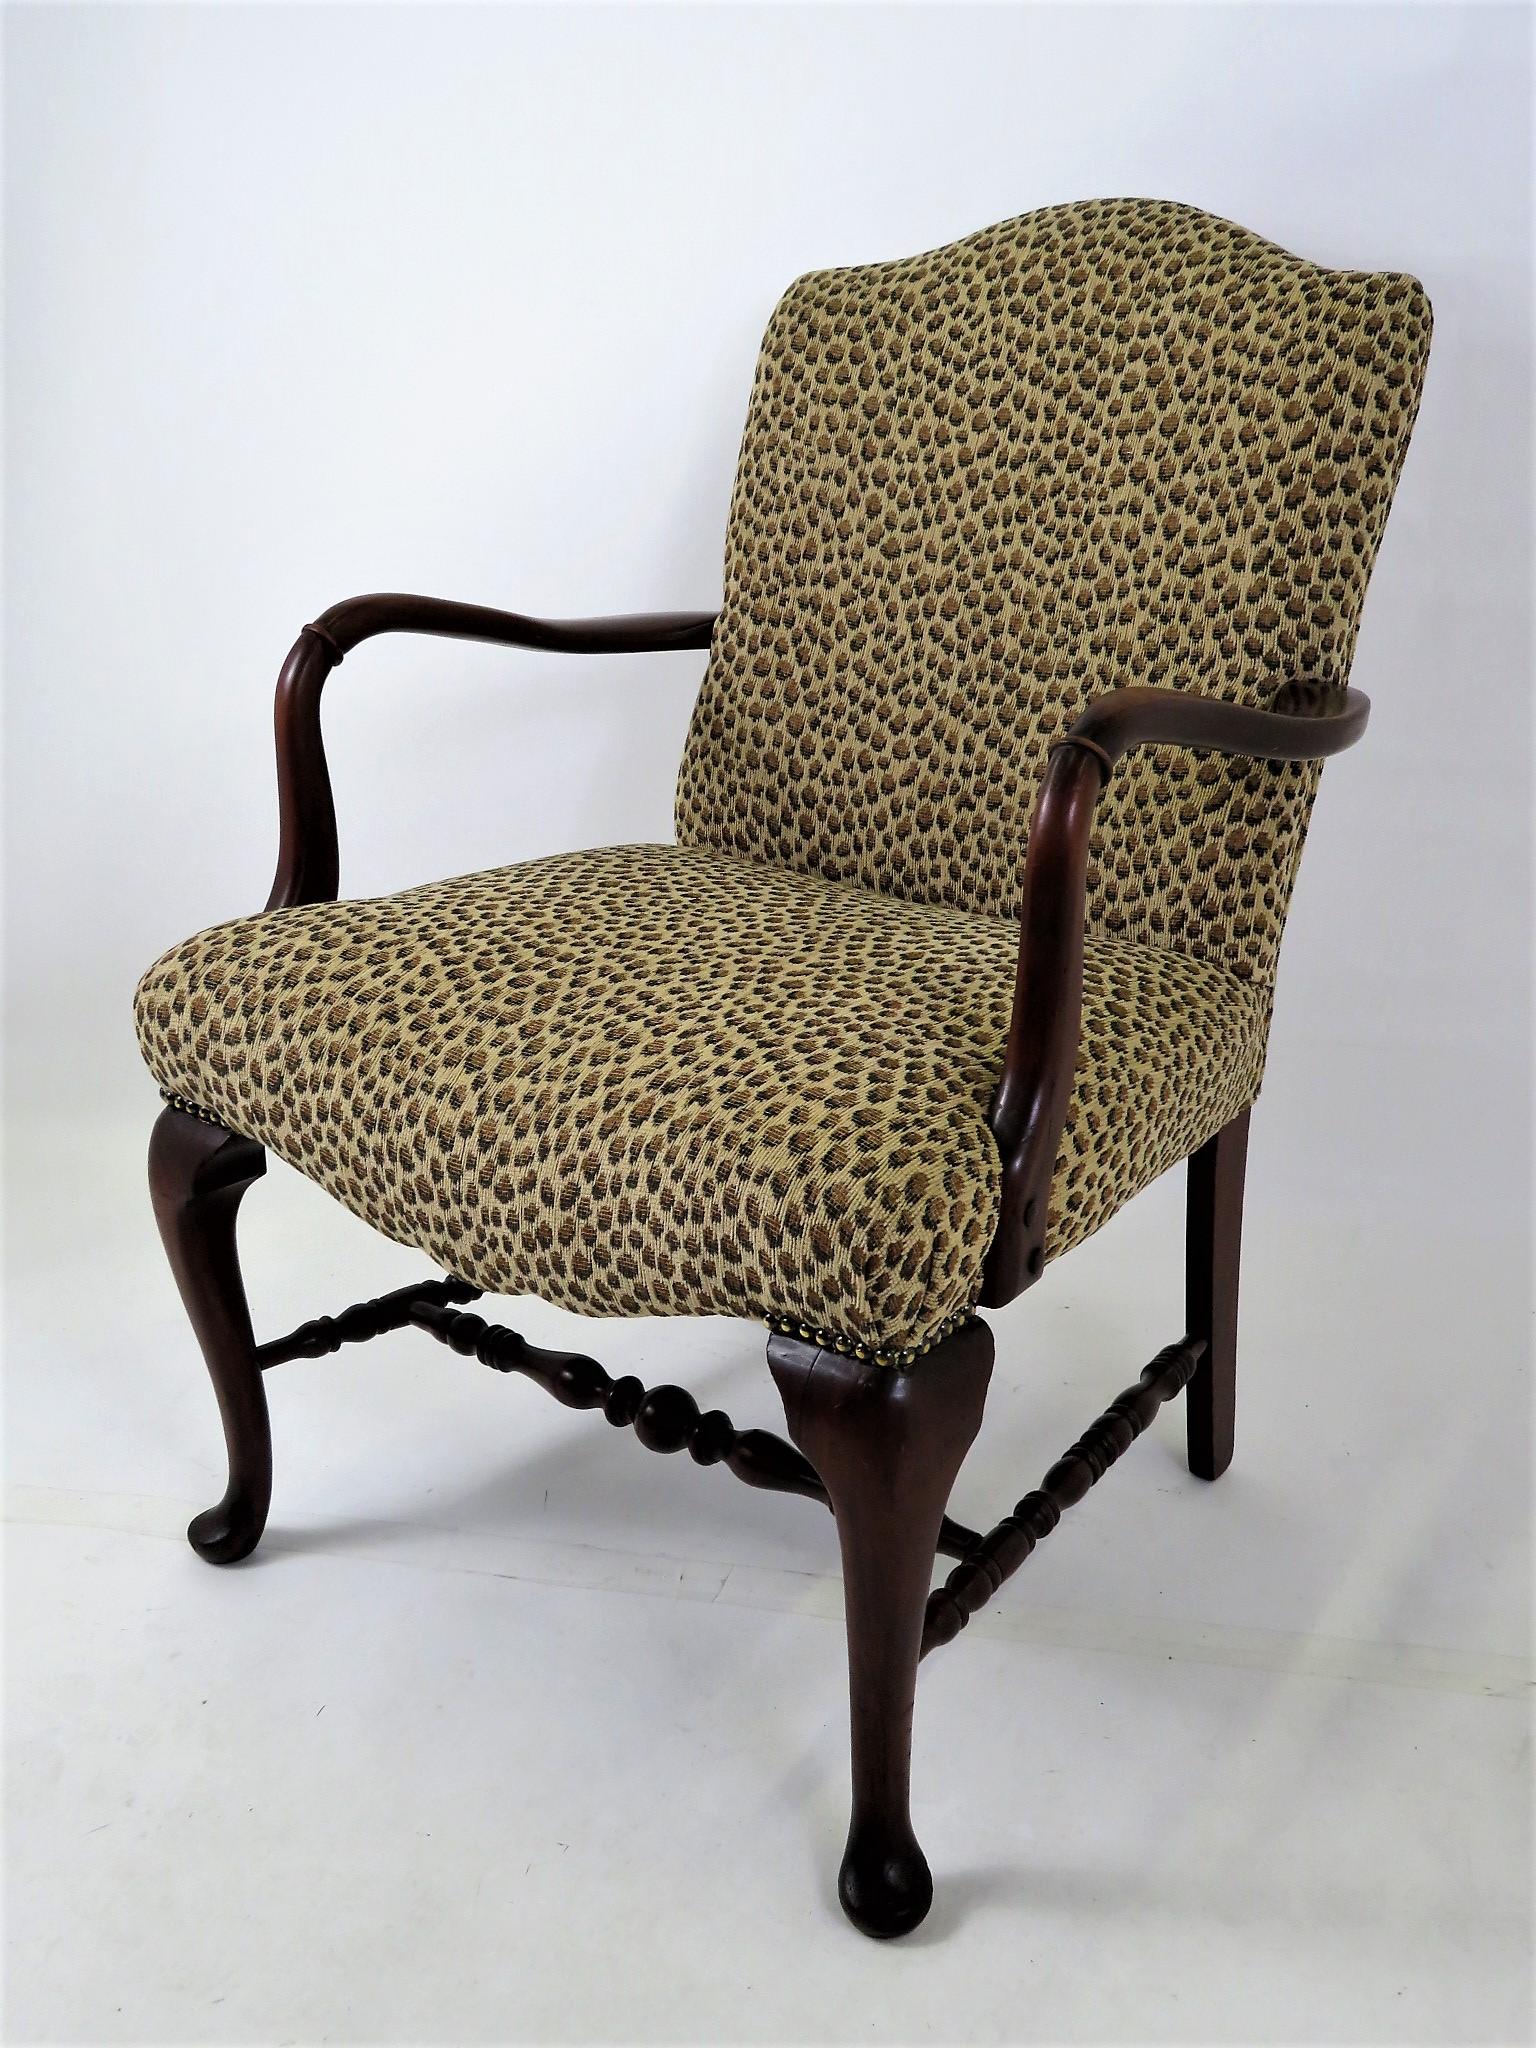 1930s-40s American Queen Anne Style upholstered armchair. Having a shaped apron of the front of the seat, turned wood stretchers, Queen Anne pad feet and a carved ring on each arm. Upholstered in a chenille leopard pattern. Original finish with